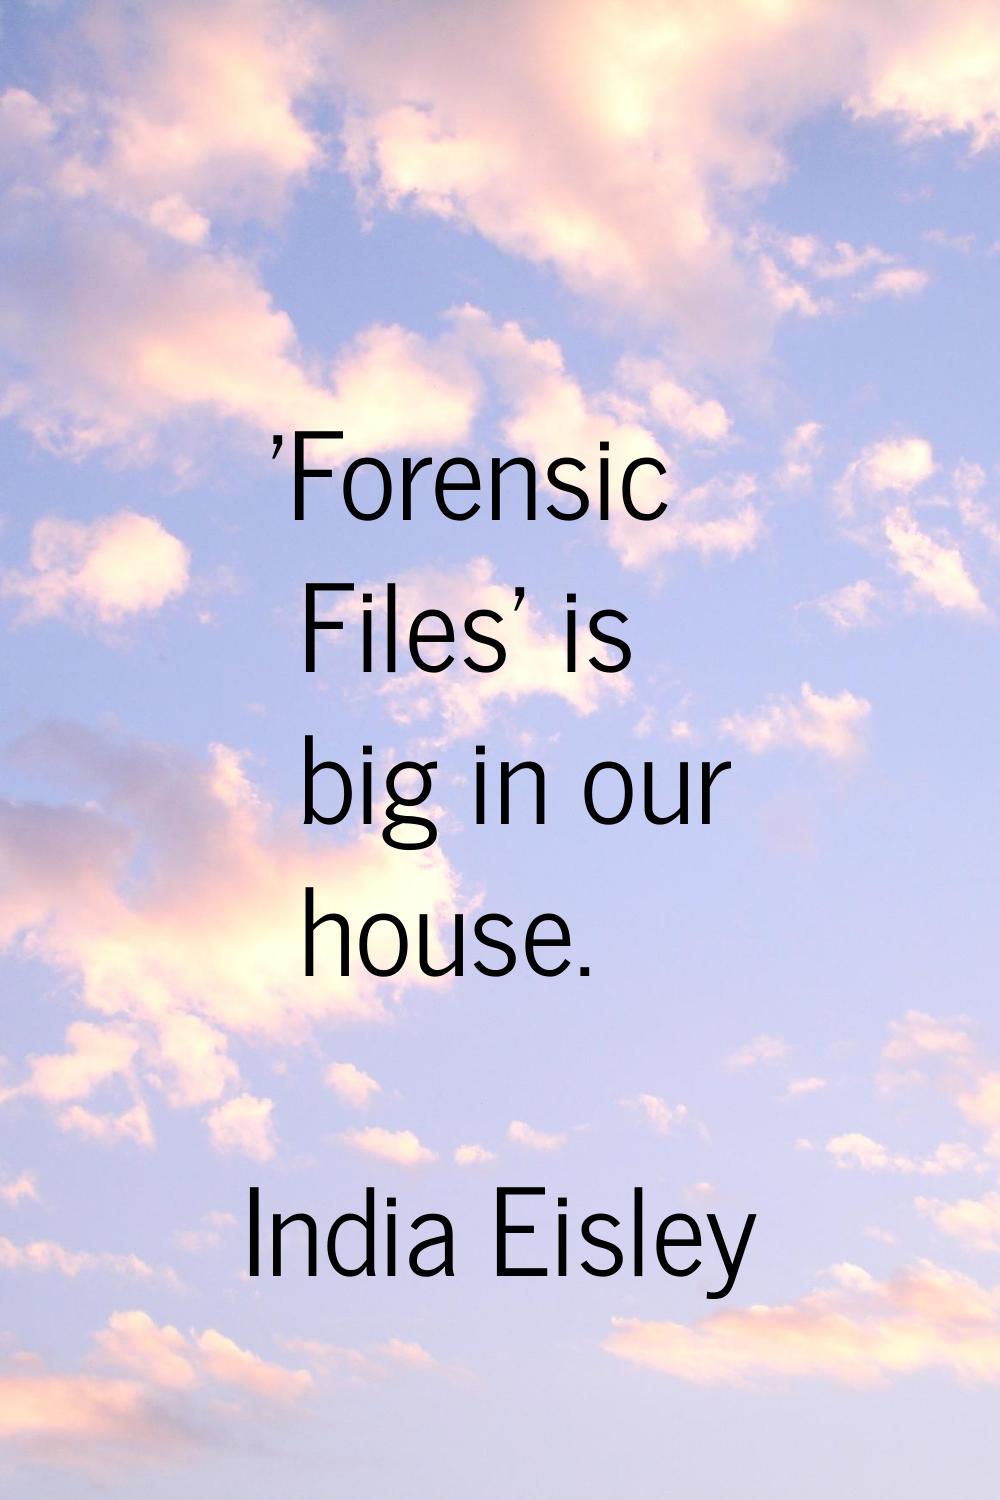 'Forensic Files' is big in our house.